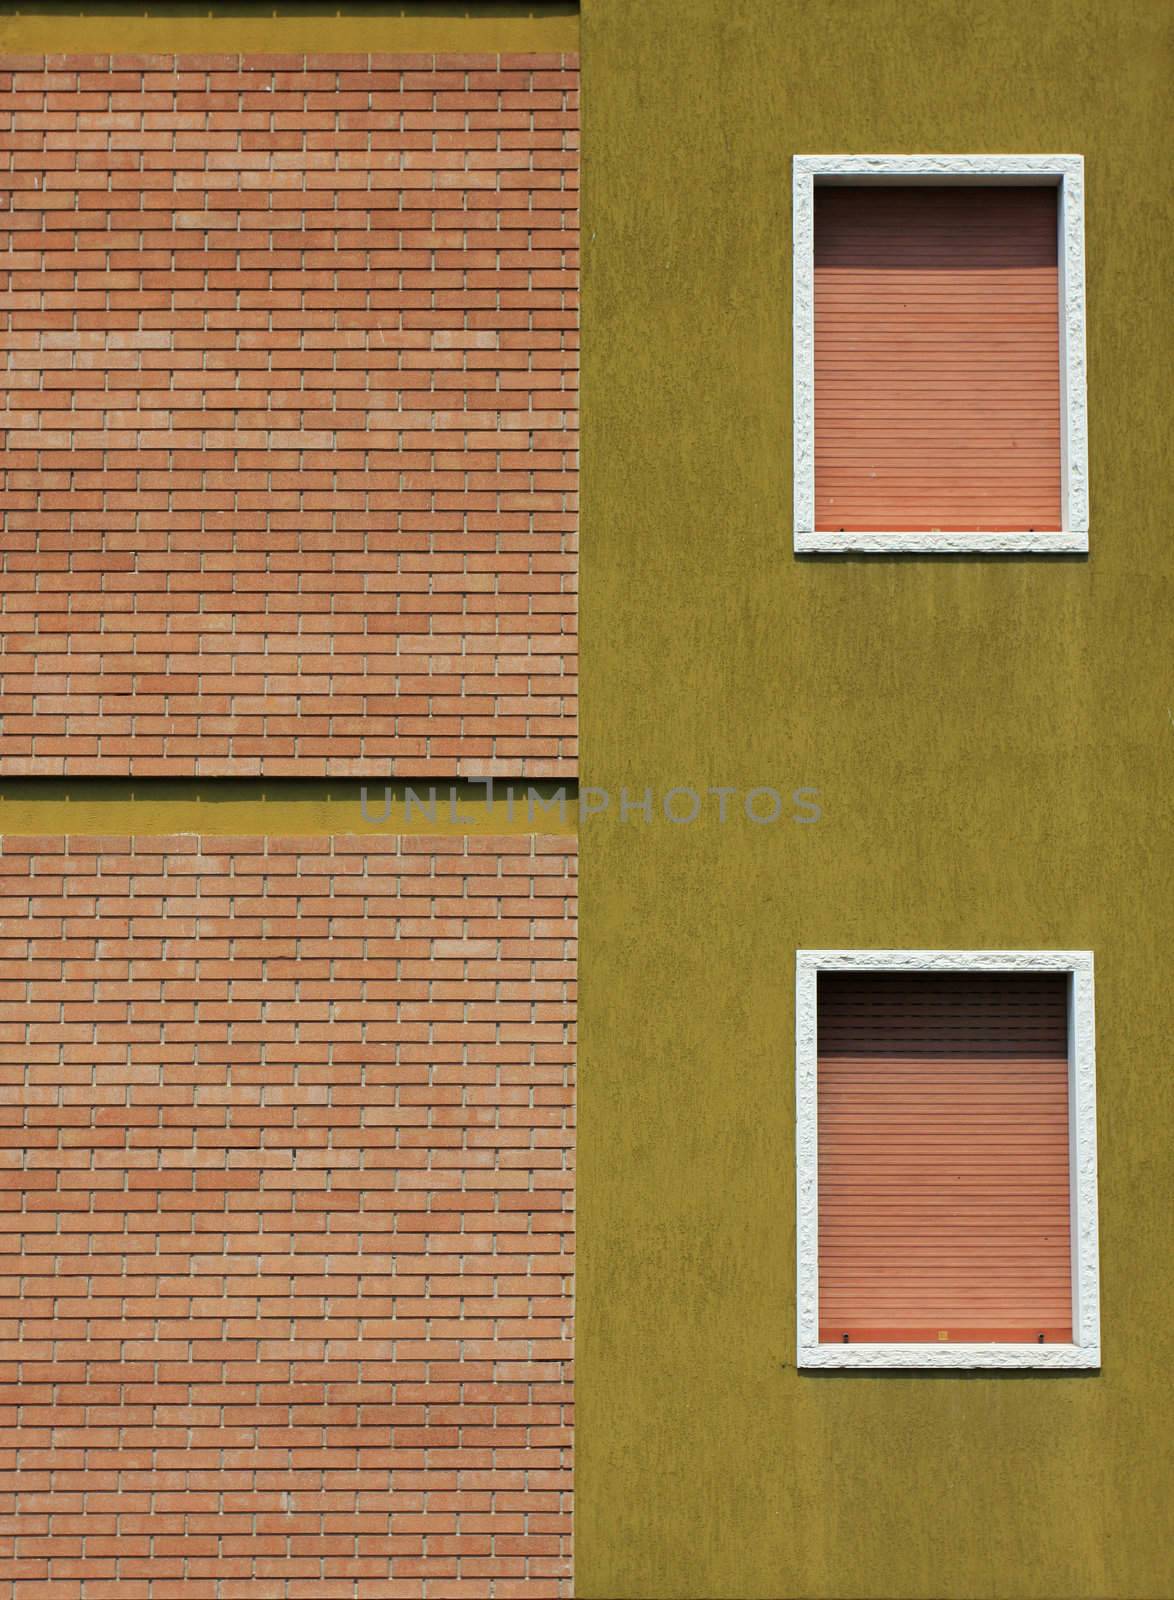 two windows on a housewall, great symmetry and harmony